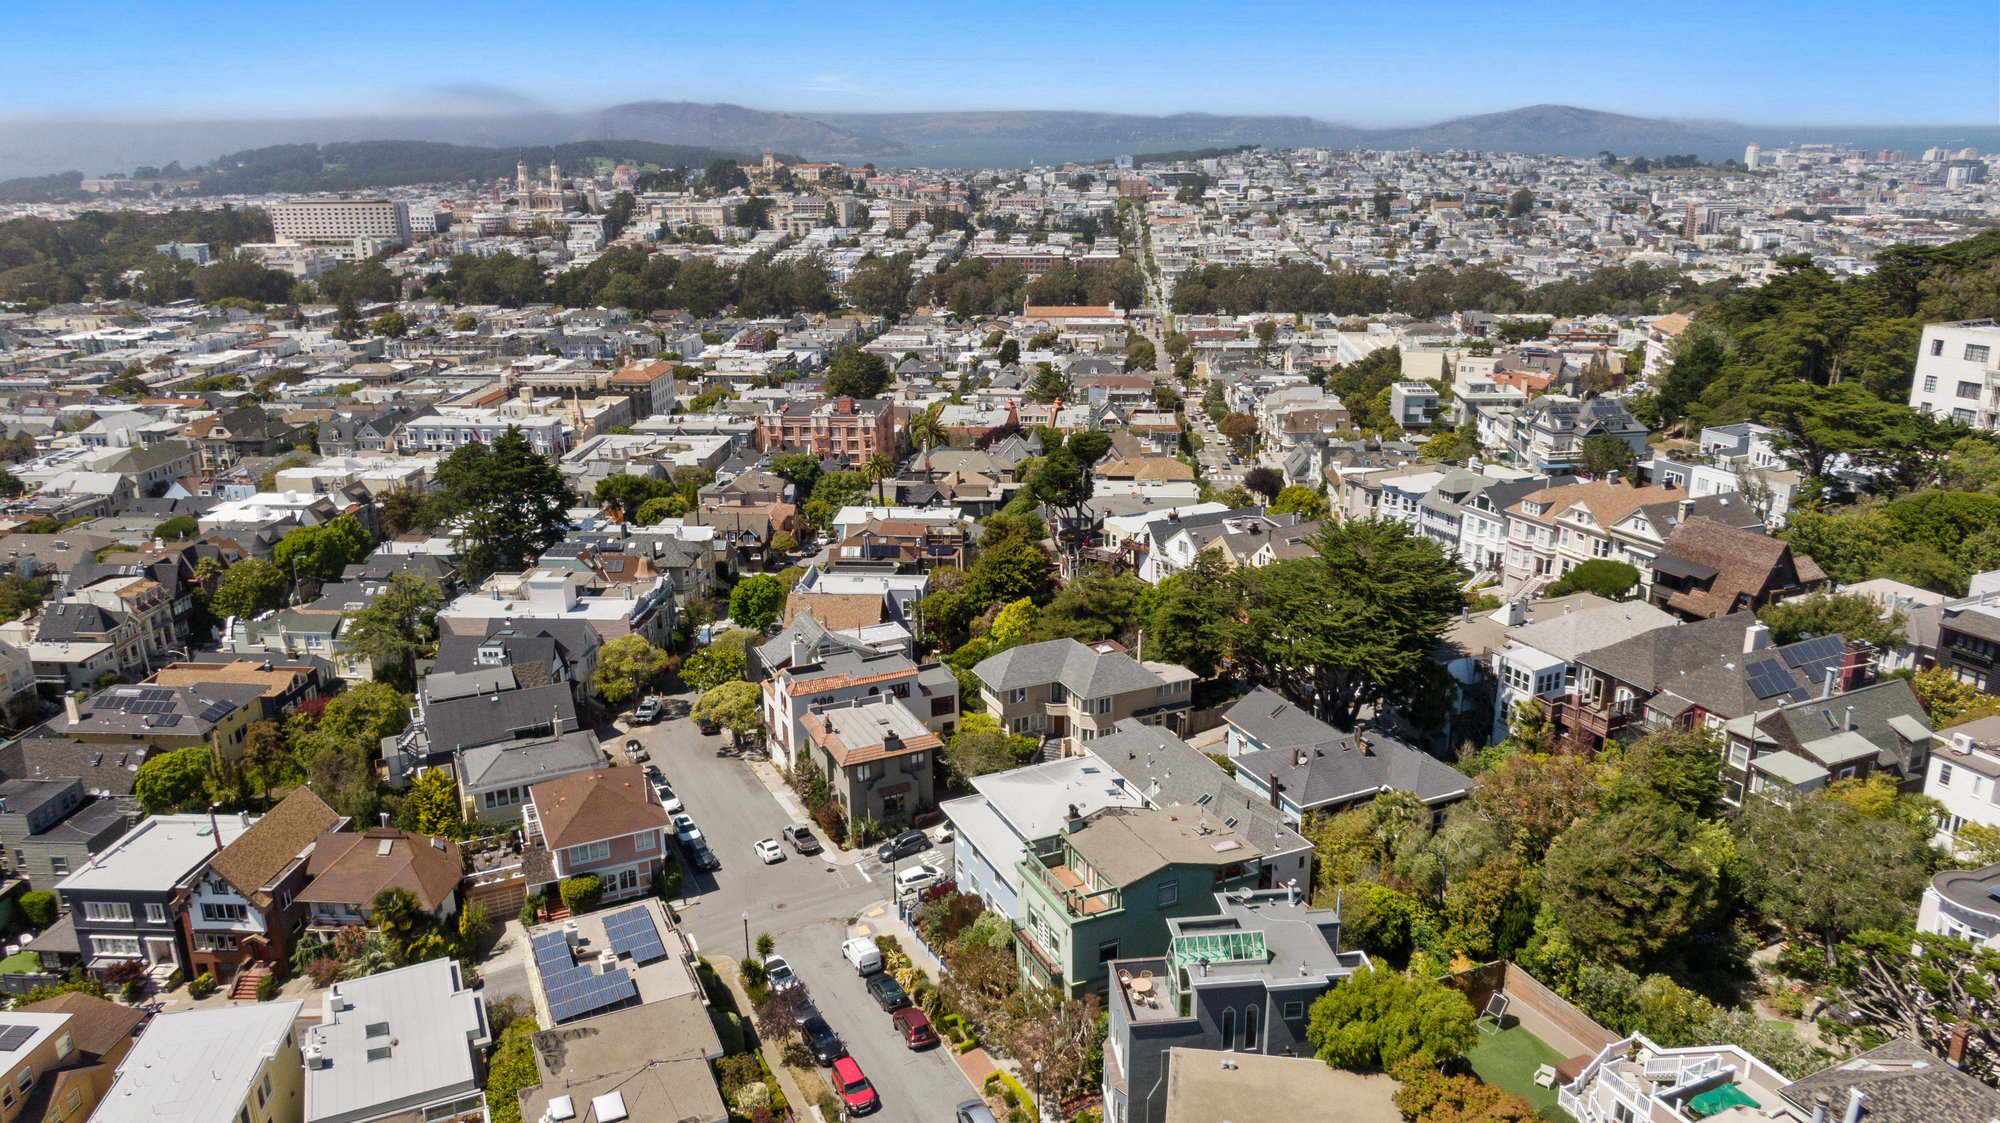 Property Photo: Aerial view of 4 Ashbury Terrace and downtown San Francisco beyond